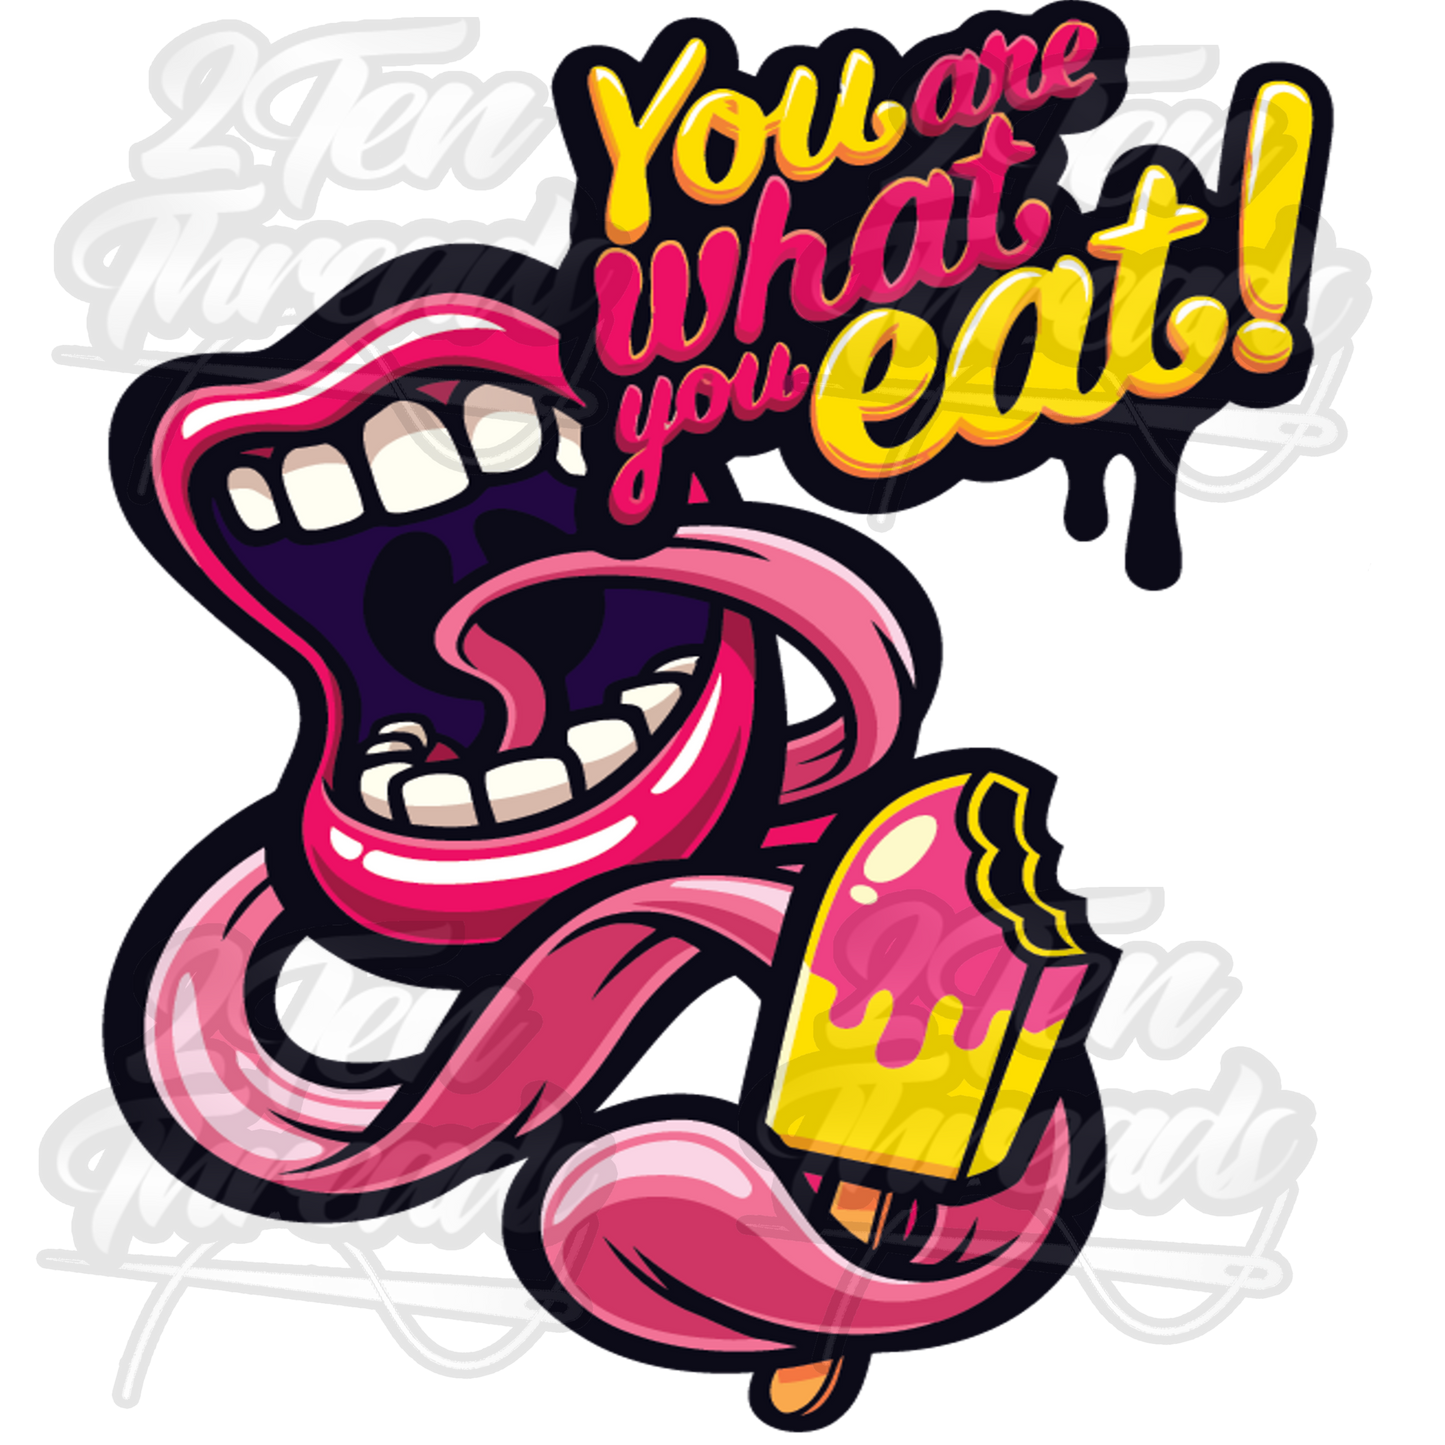 You are what you eat shirt!